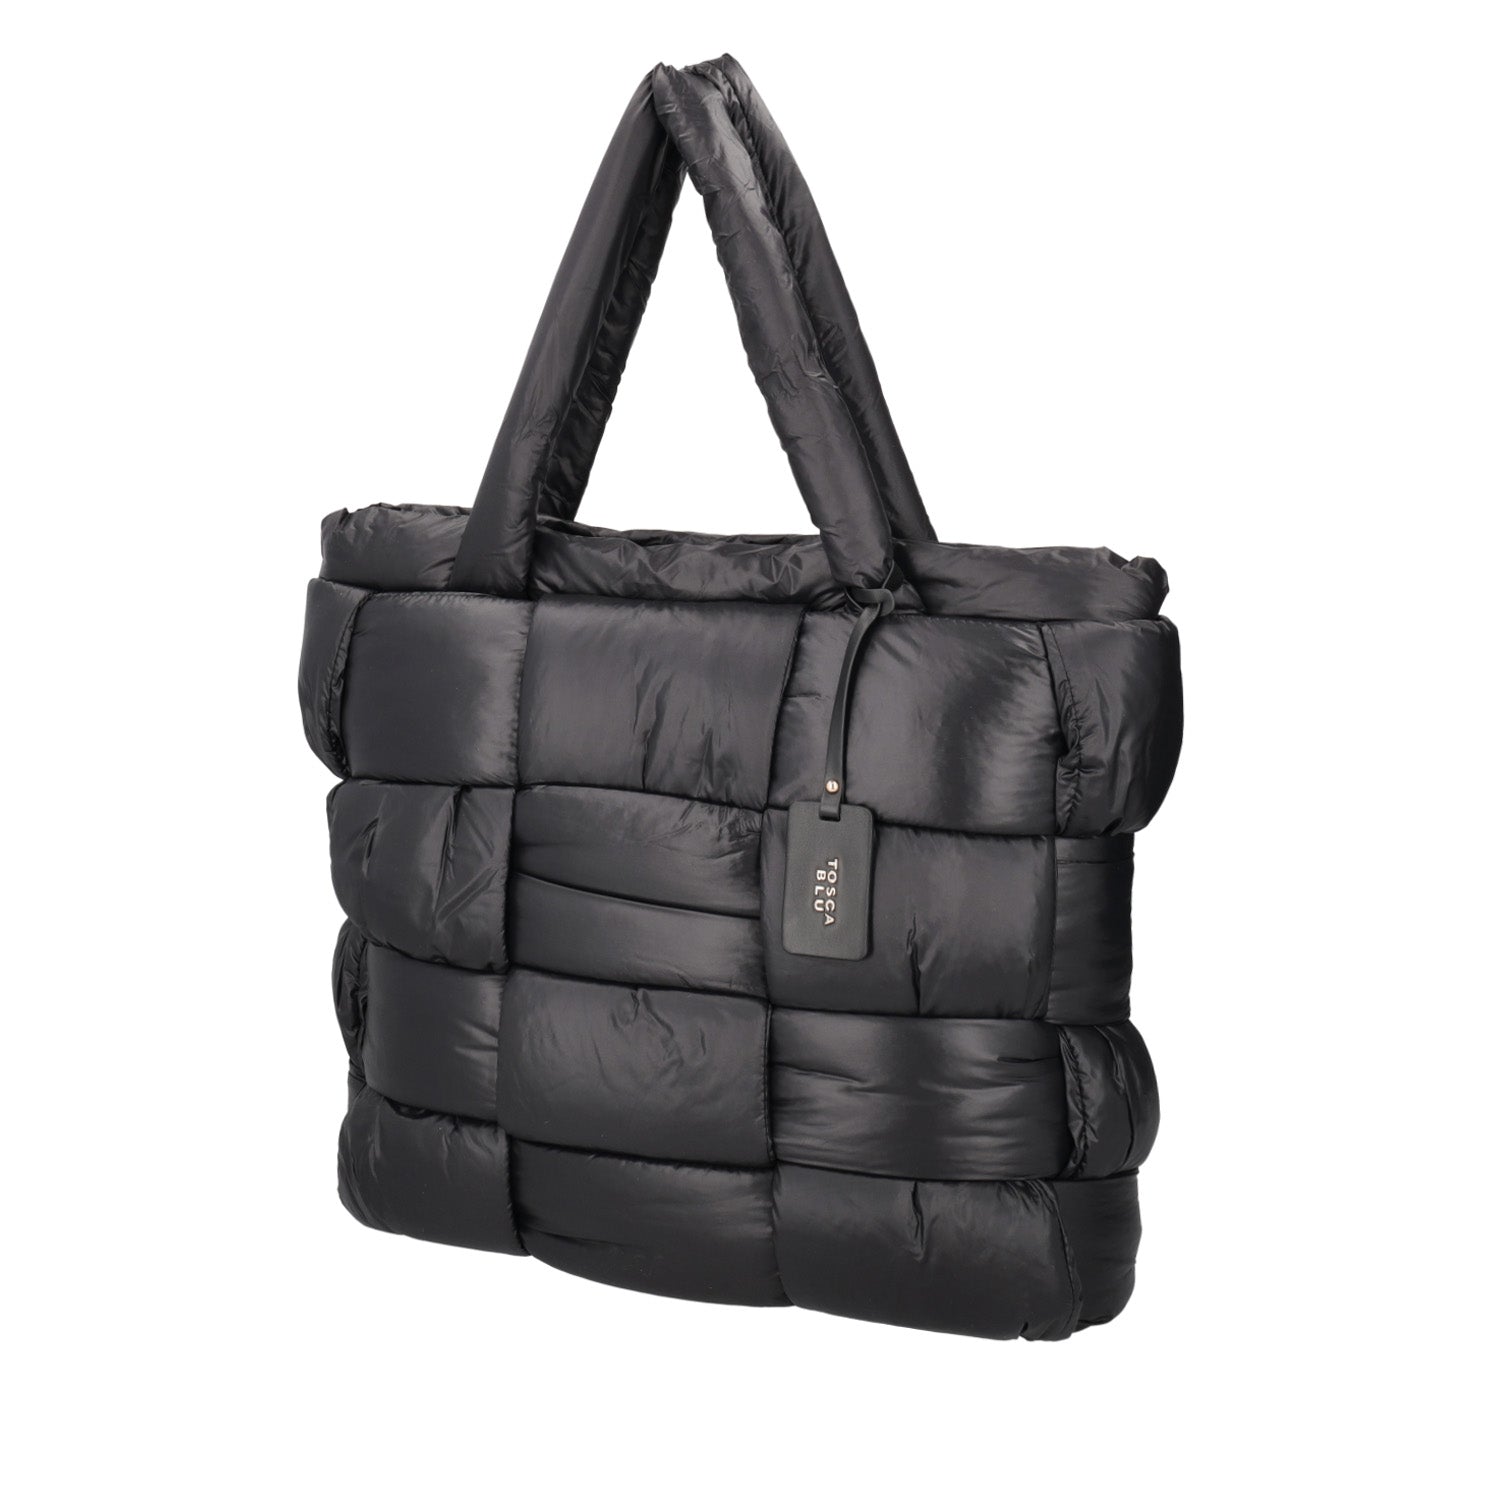 BLACK QUILTED “SHARON” SHOPPING BAG